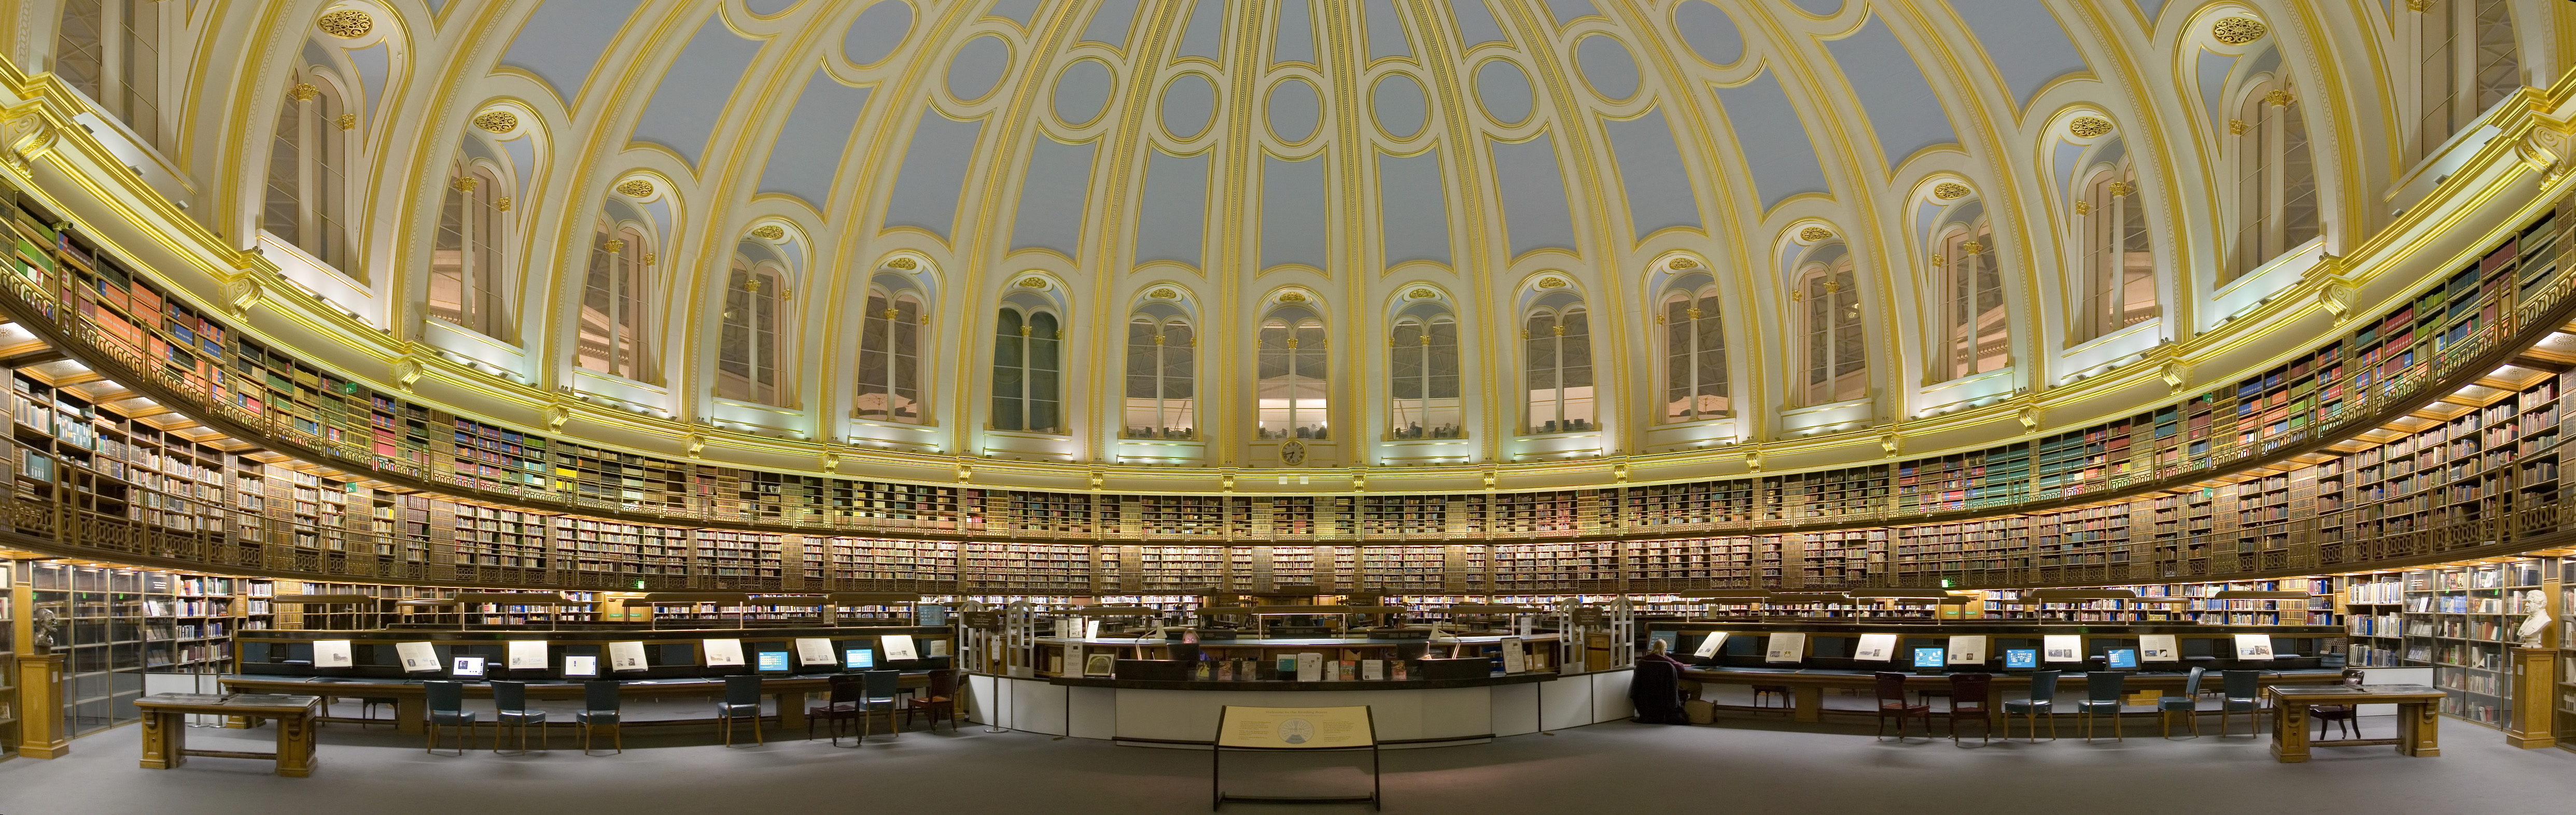 British Museum Reading Room with round tables, bookshelves, and a glass dome ceiling.